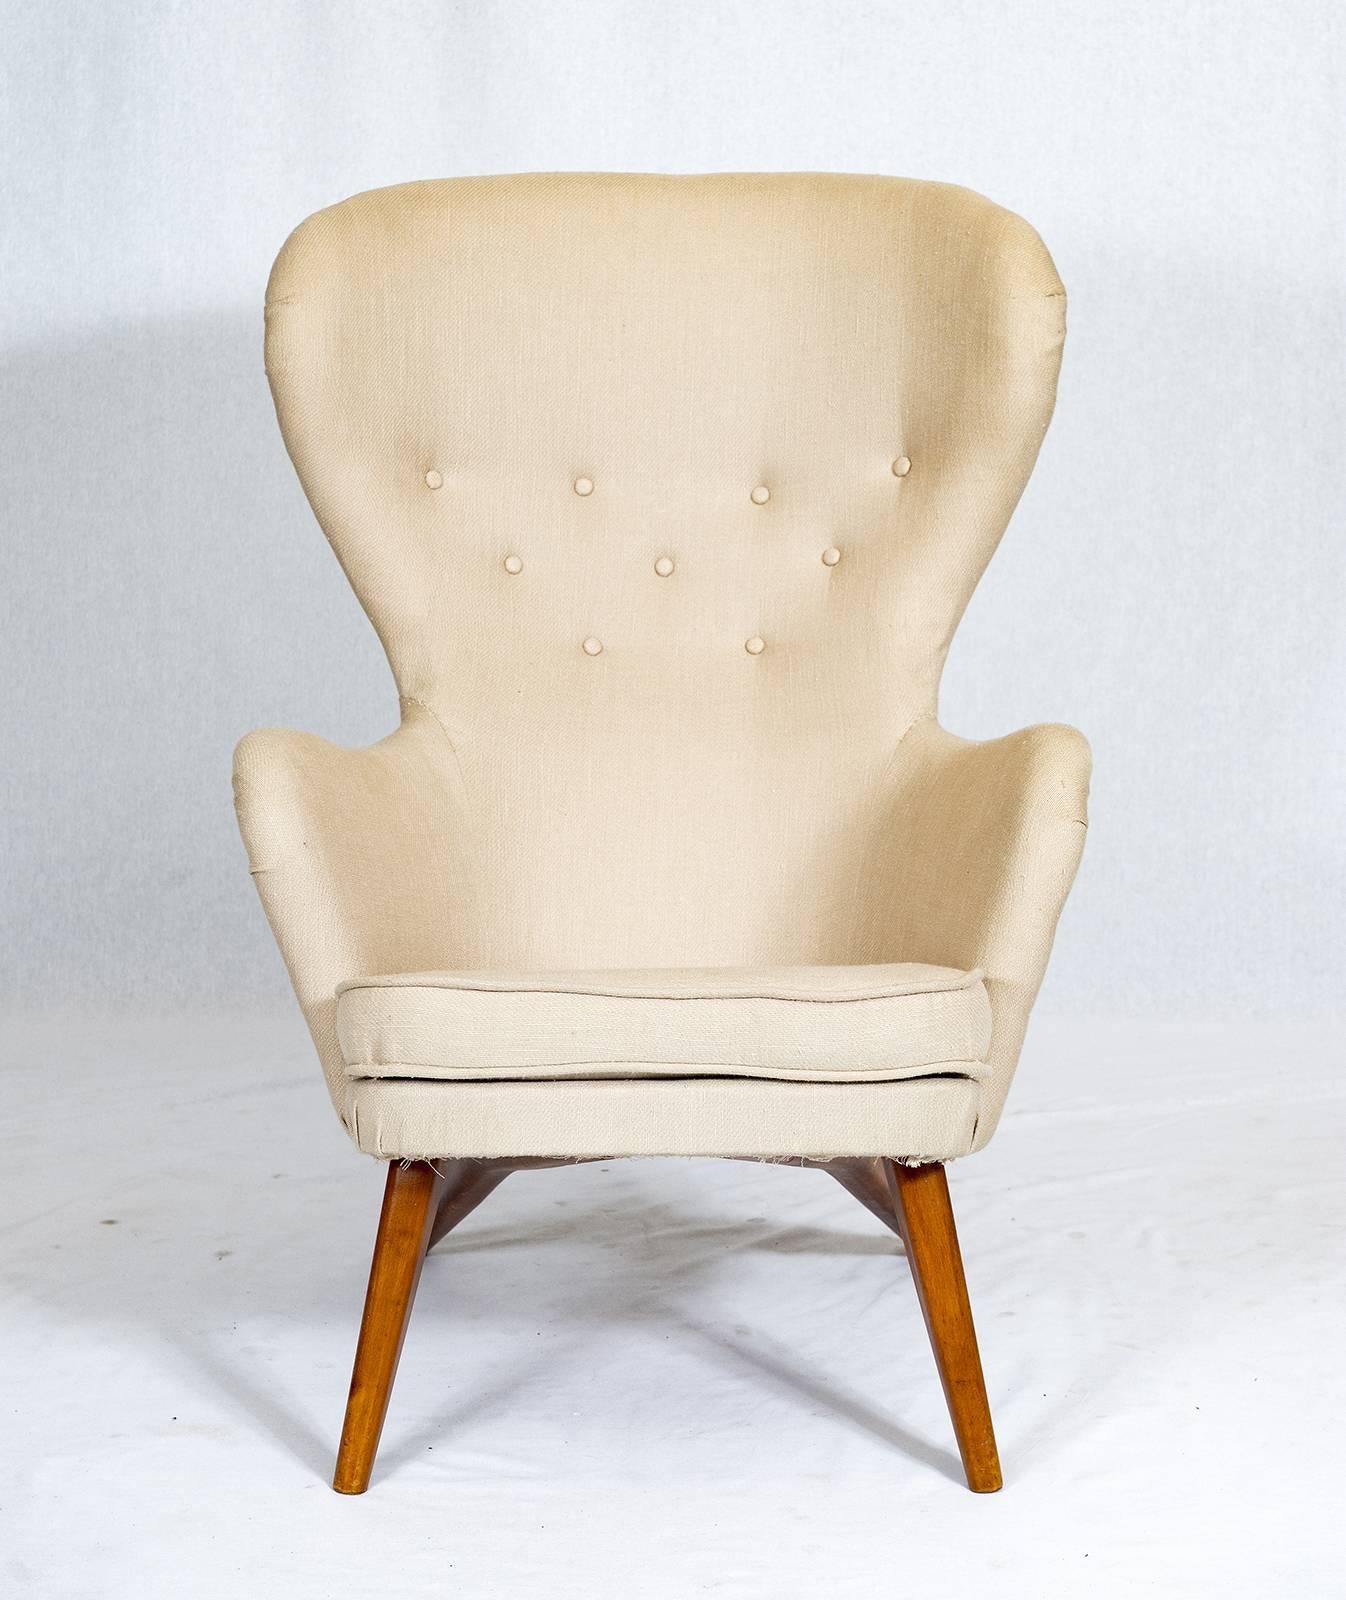 Carl Gustav Hiort af Ornäs lounge chair.  Store formerly known as ARTFUL DODGER INC